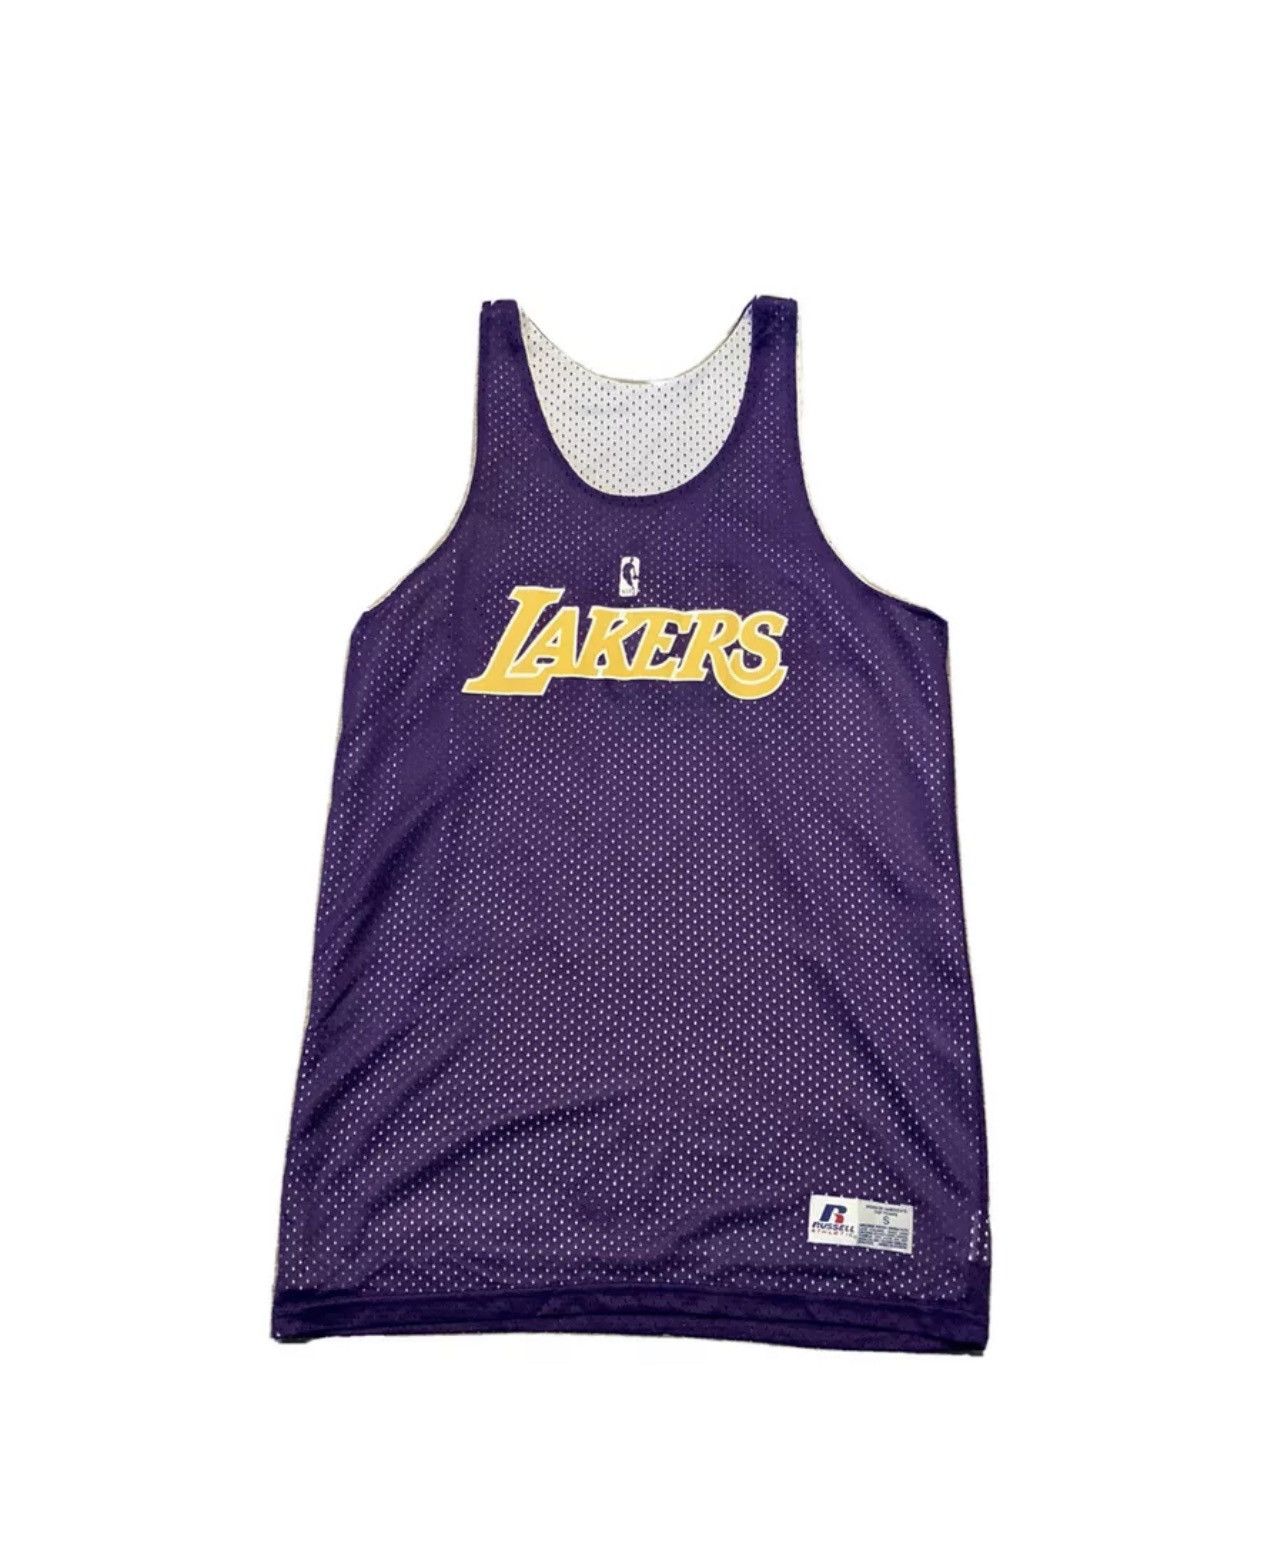 Vintage reversible Los Angeles Lakers NBA Champion practice jersey size 2XL